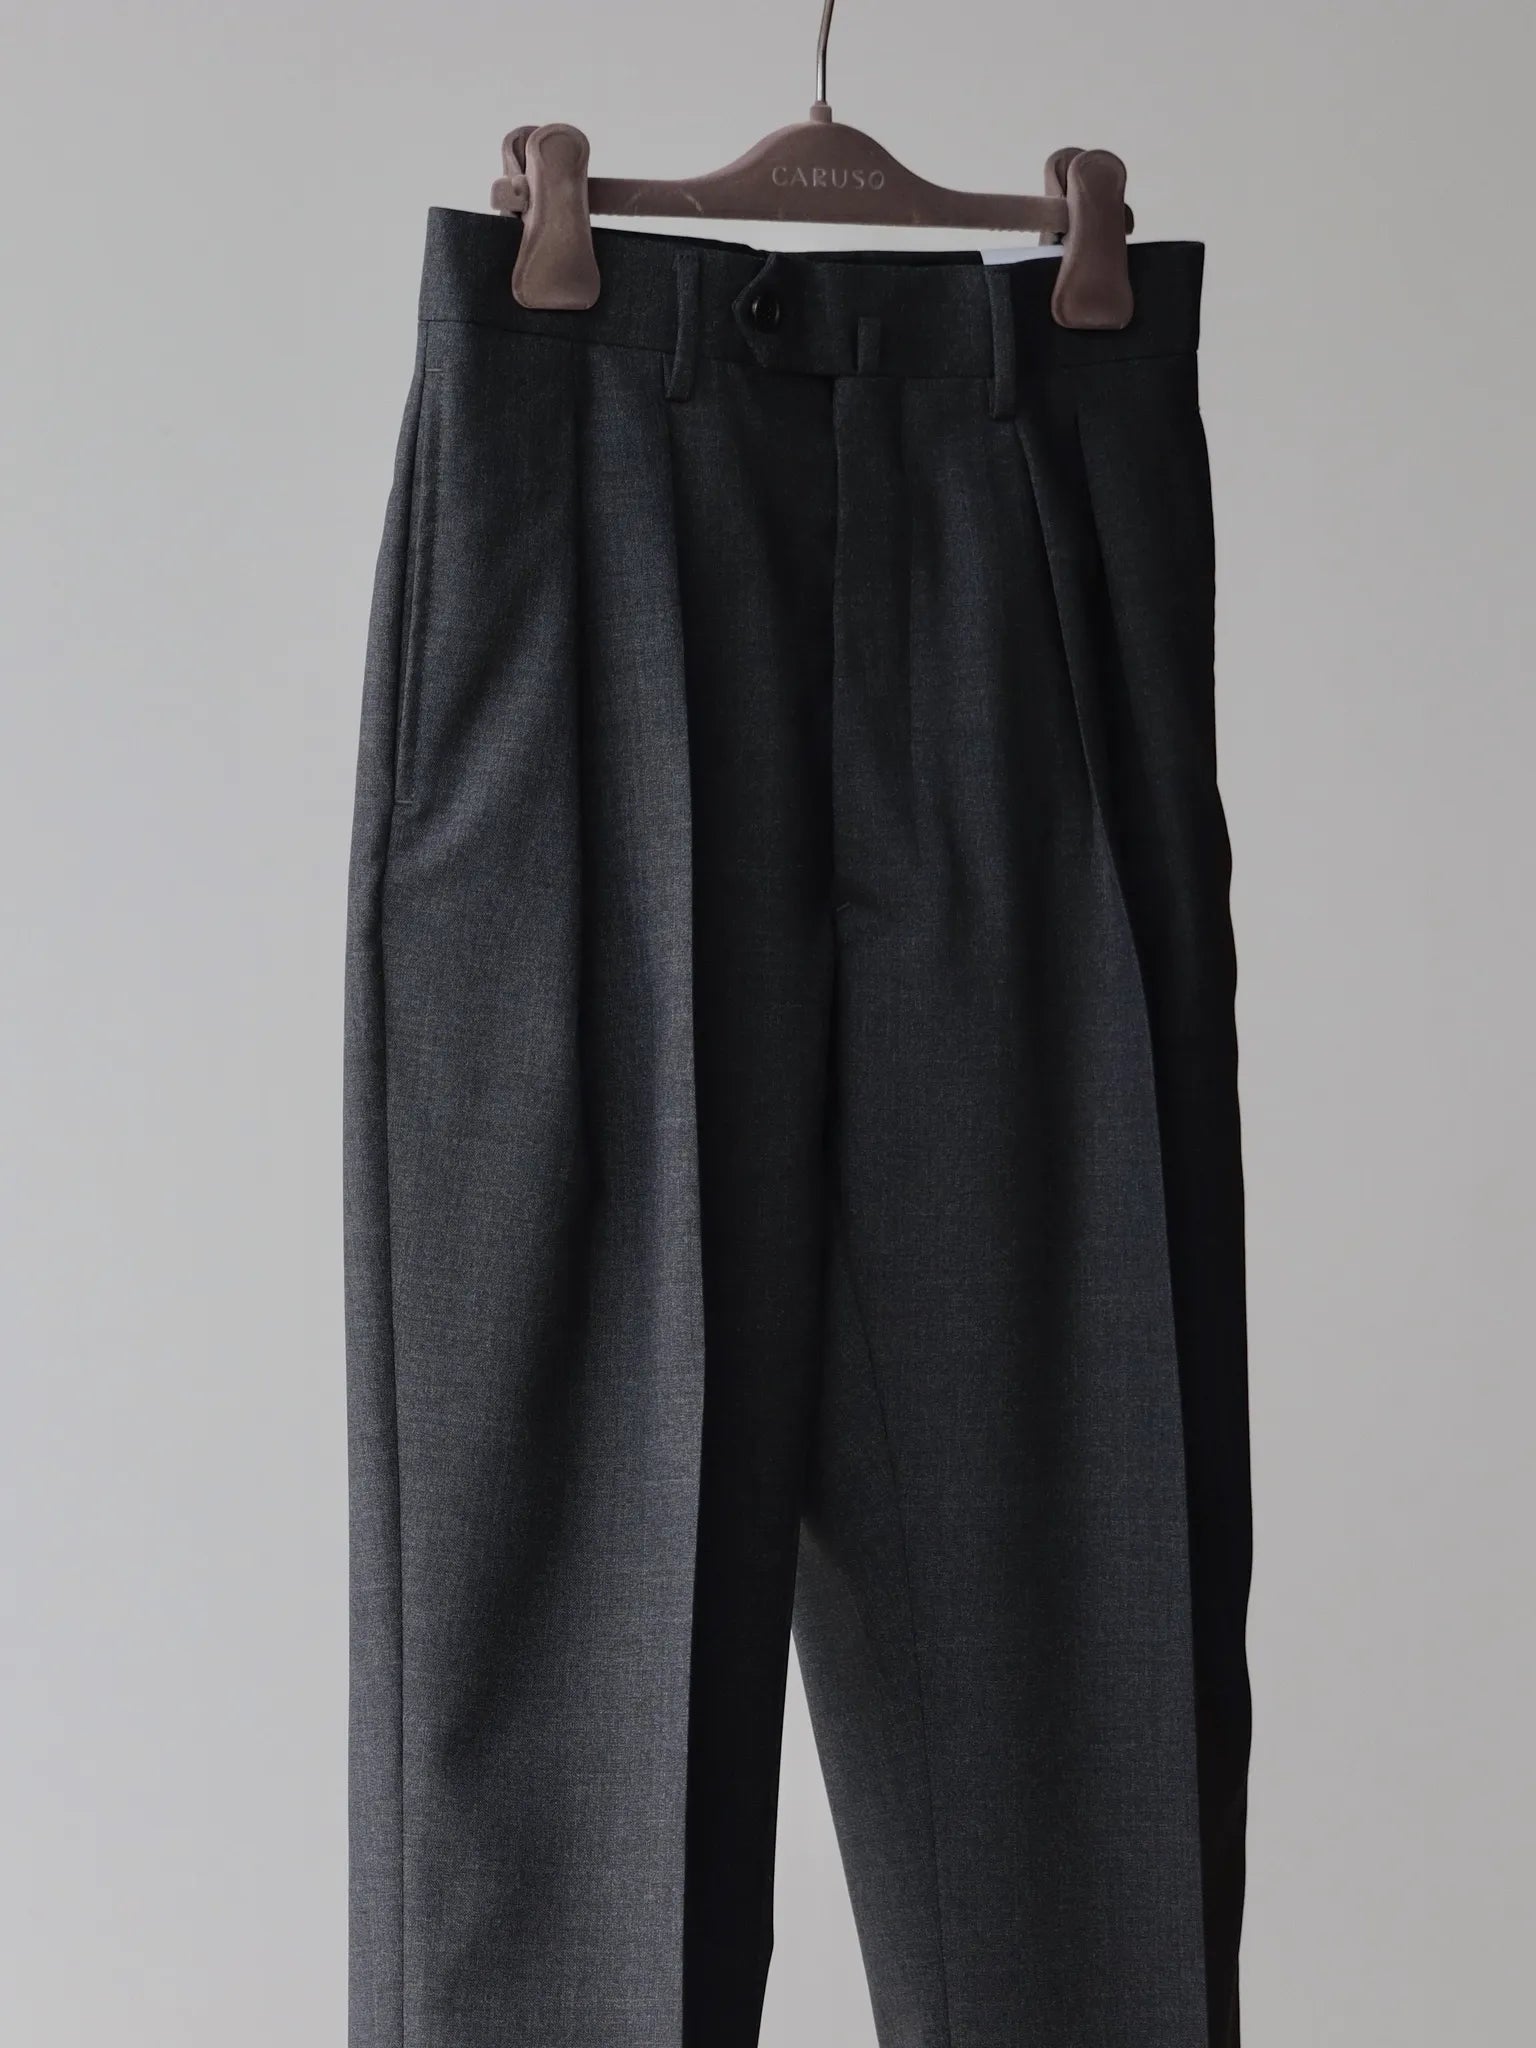 neat-caruso-neat-solid-trousers-gray-2